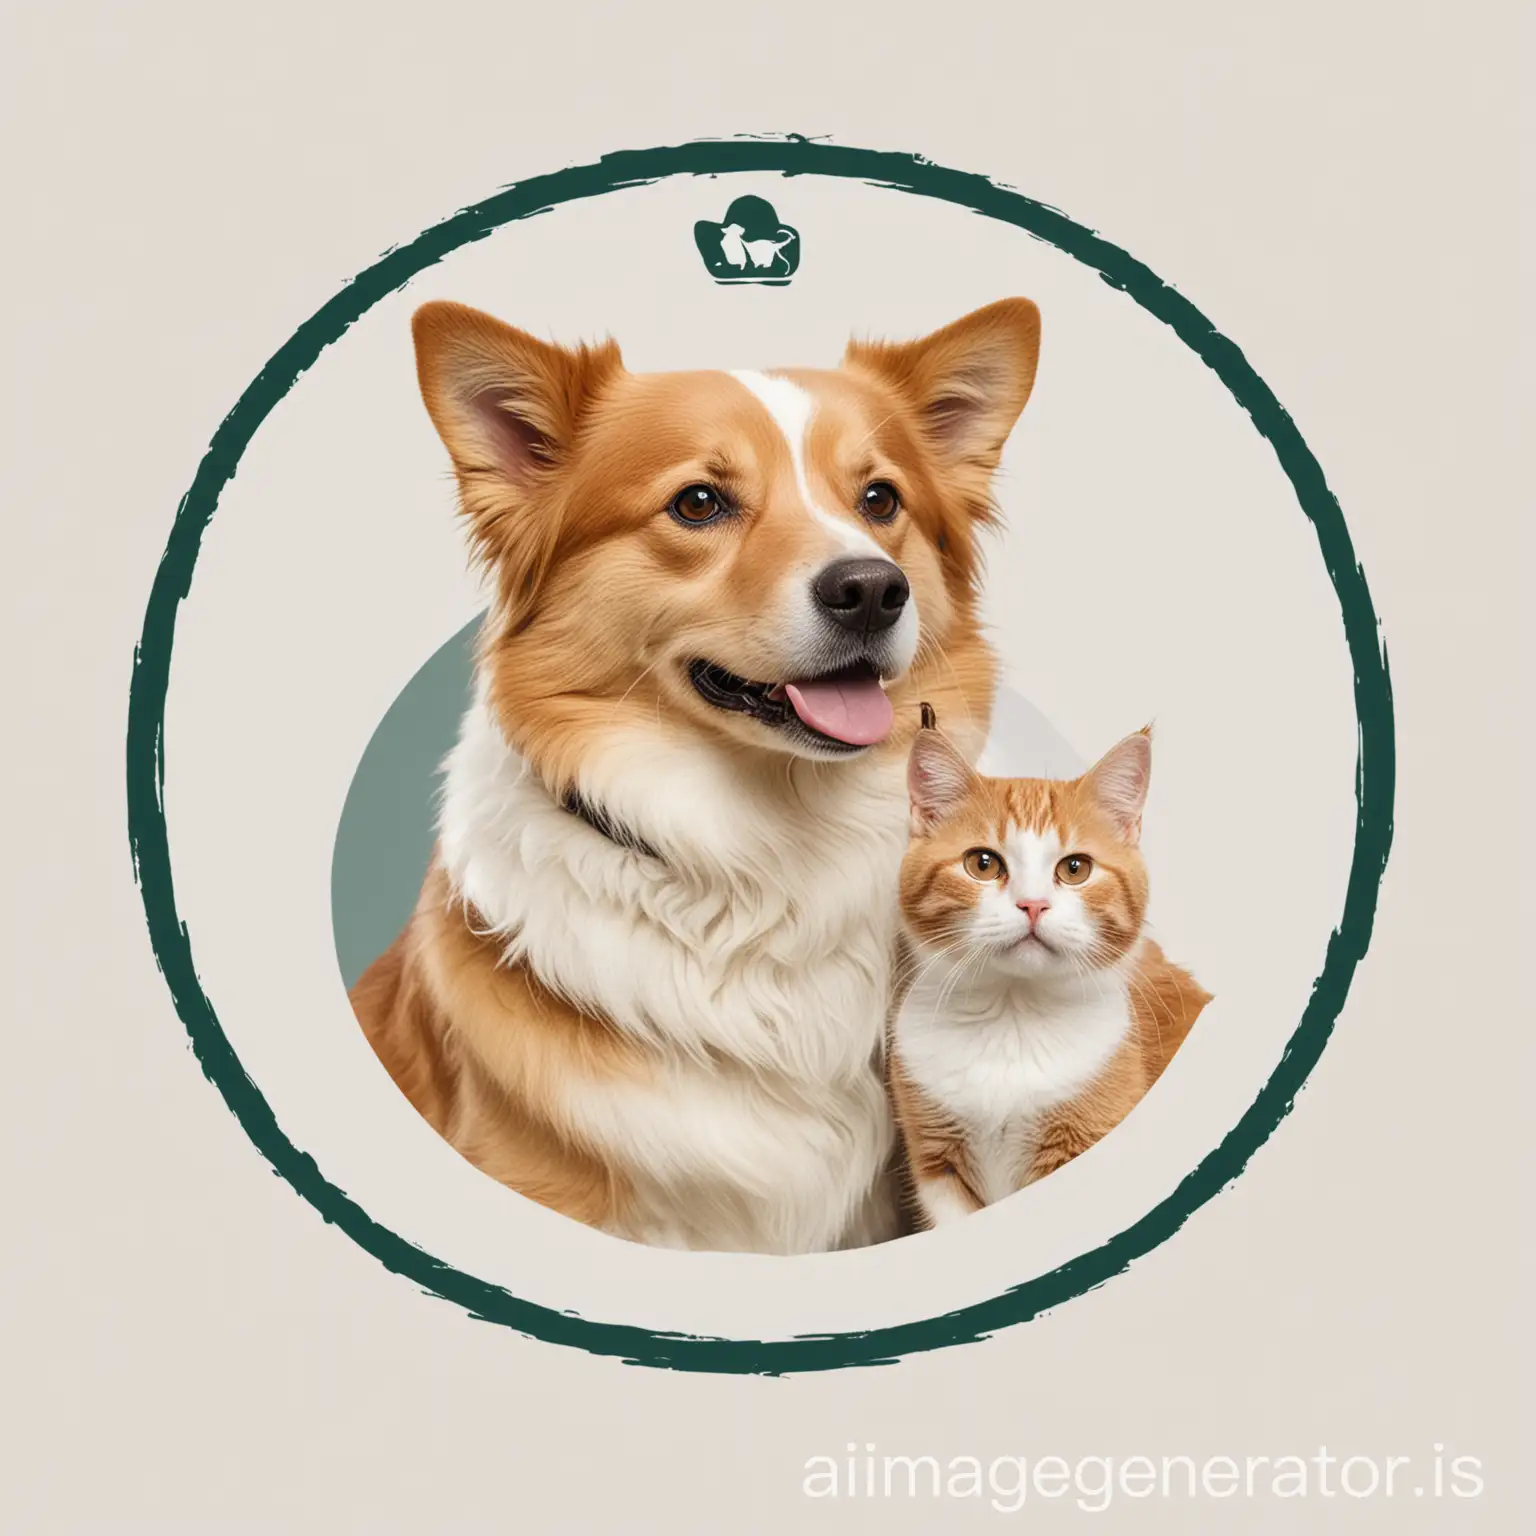 Veterinary-Clinic-Logo-Dog-and-Cat-in-Circular-Profile-Picture-on-White-Background